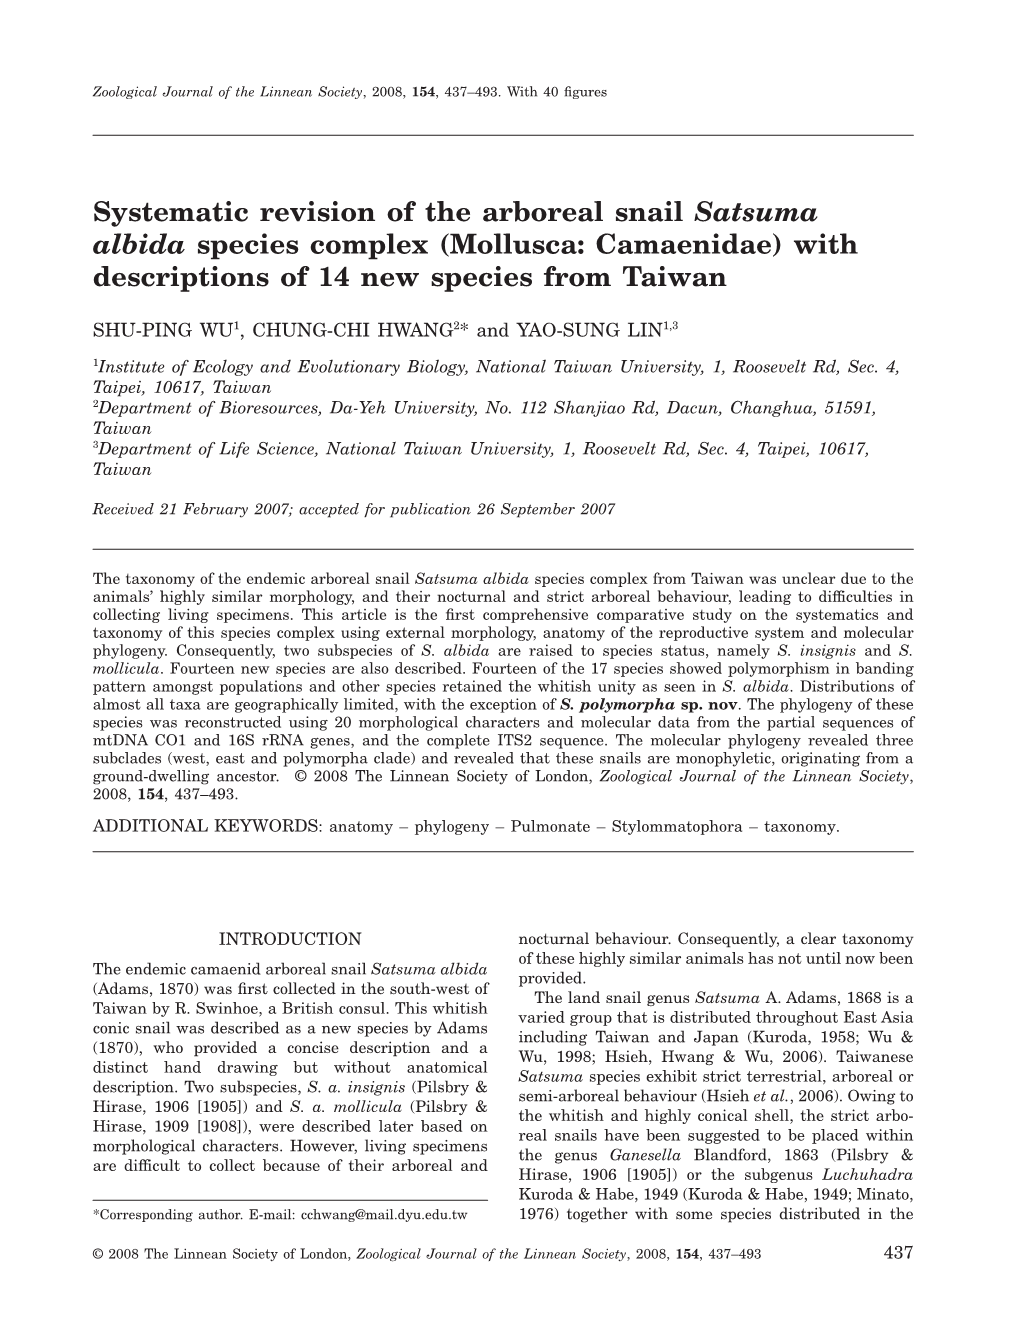 Systematic Revision of the Arboreal Snail Satsuma Albida Species Complex (Mollusca: Camaenidae) with Descriptions of 14 New Species from Taiwan